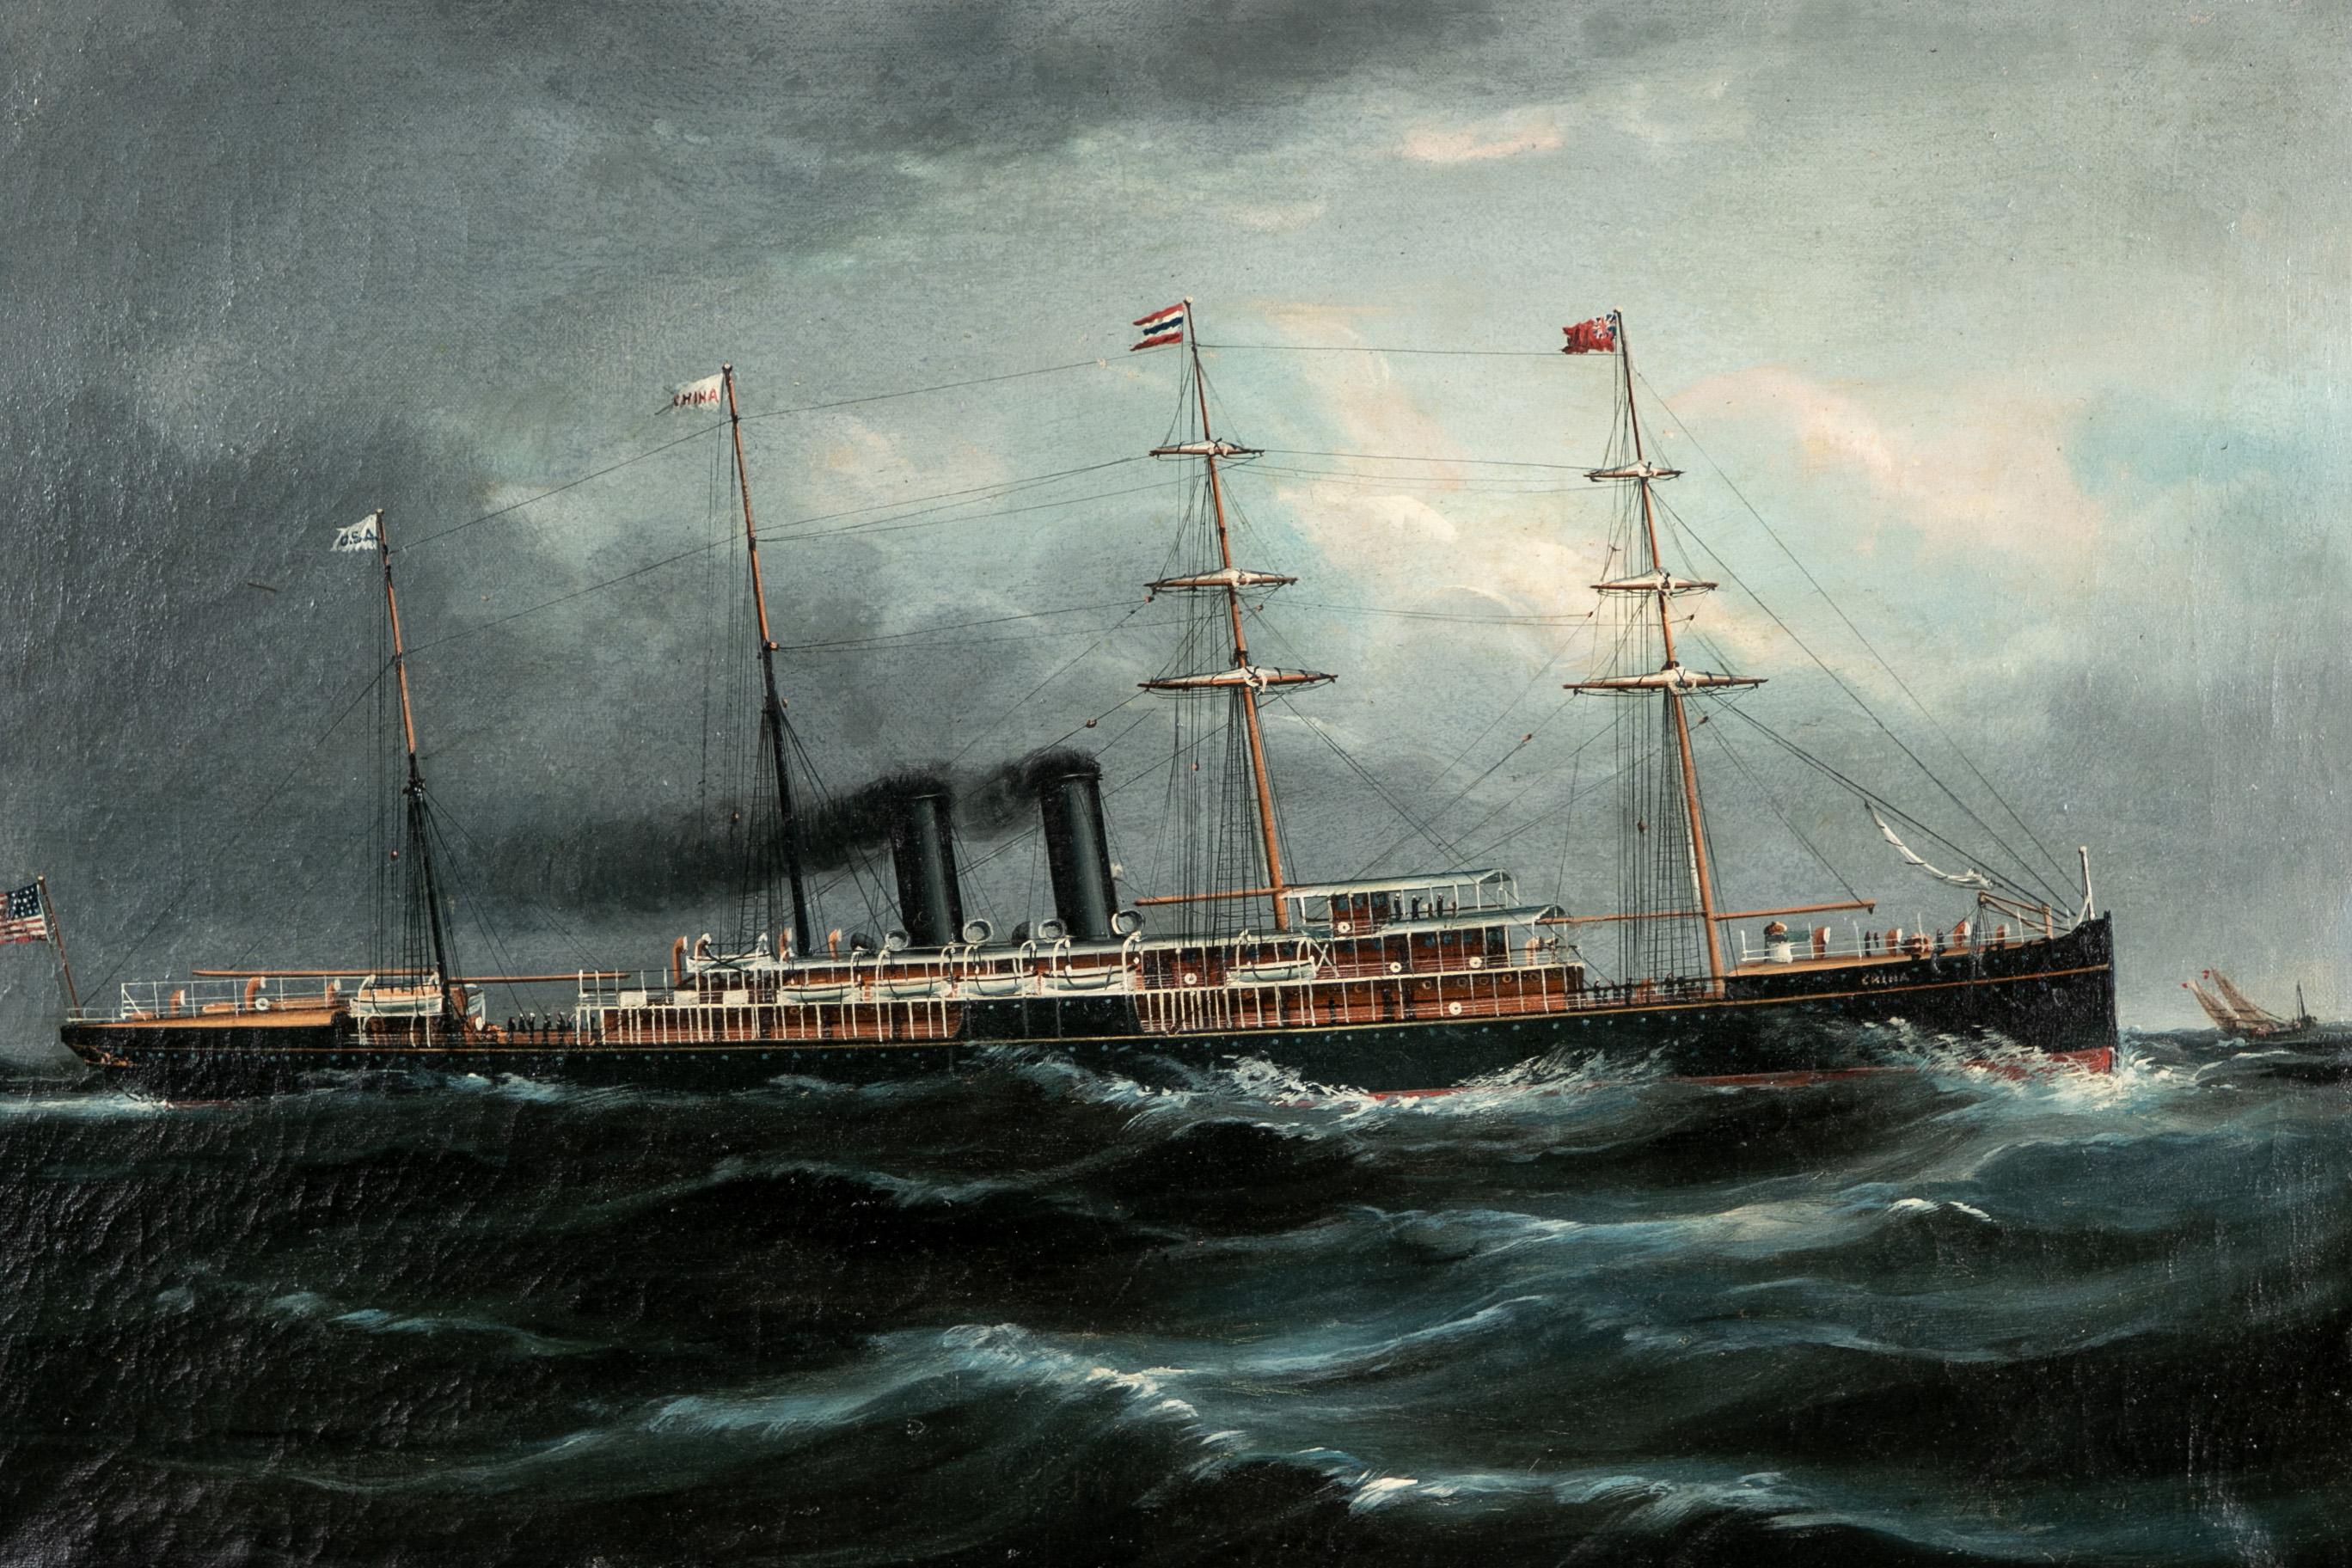 19th century China Trade painting depicting the SS China, of the Pacific Mail Steamship Co., garnishing American and English flags while crossing through turbulent waters with a dark and stormy sky leering overhead. Mounted in an early 20th century